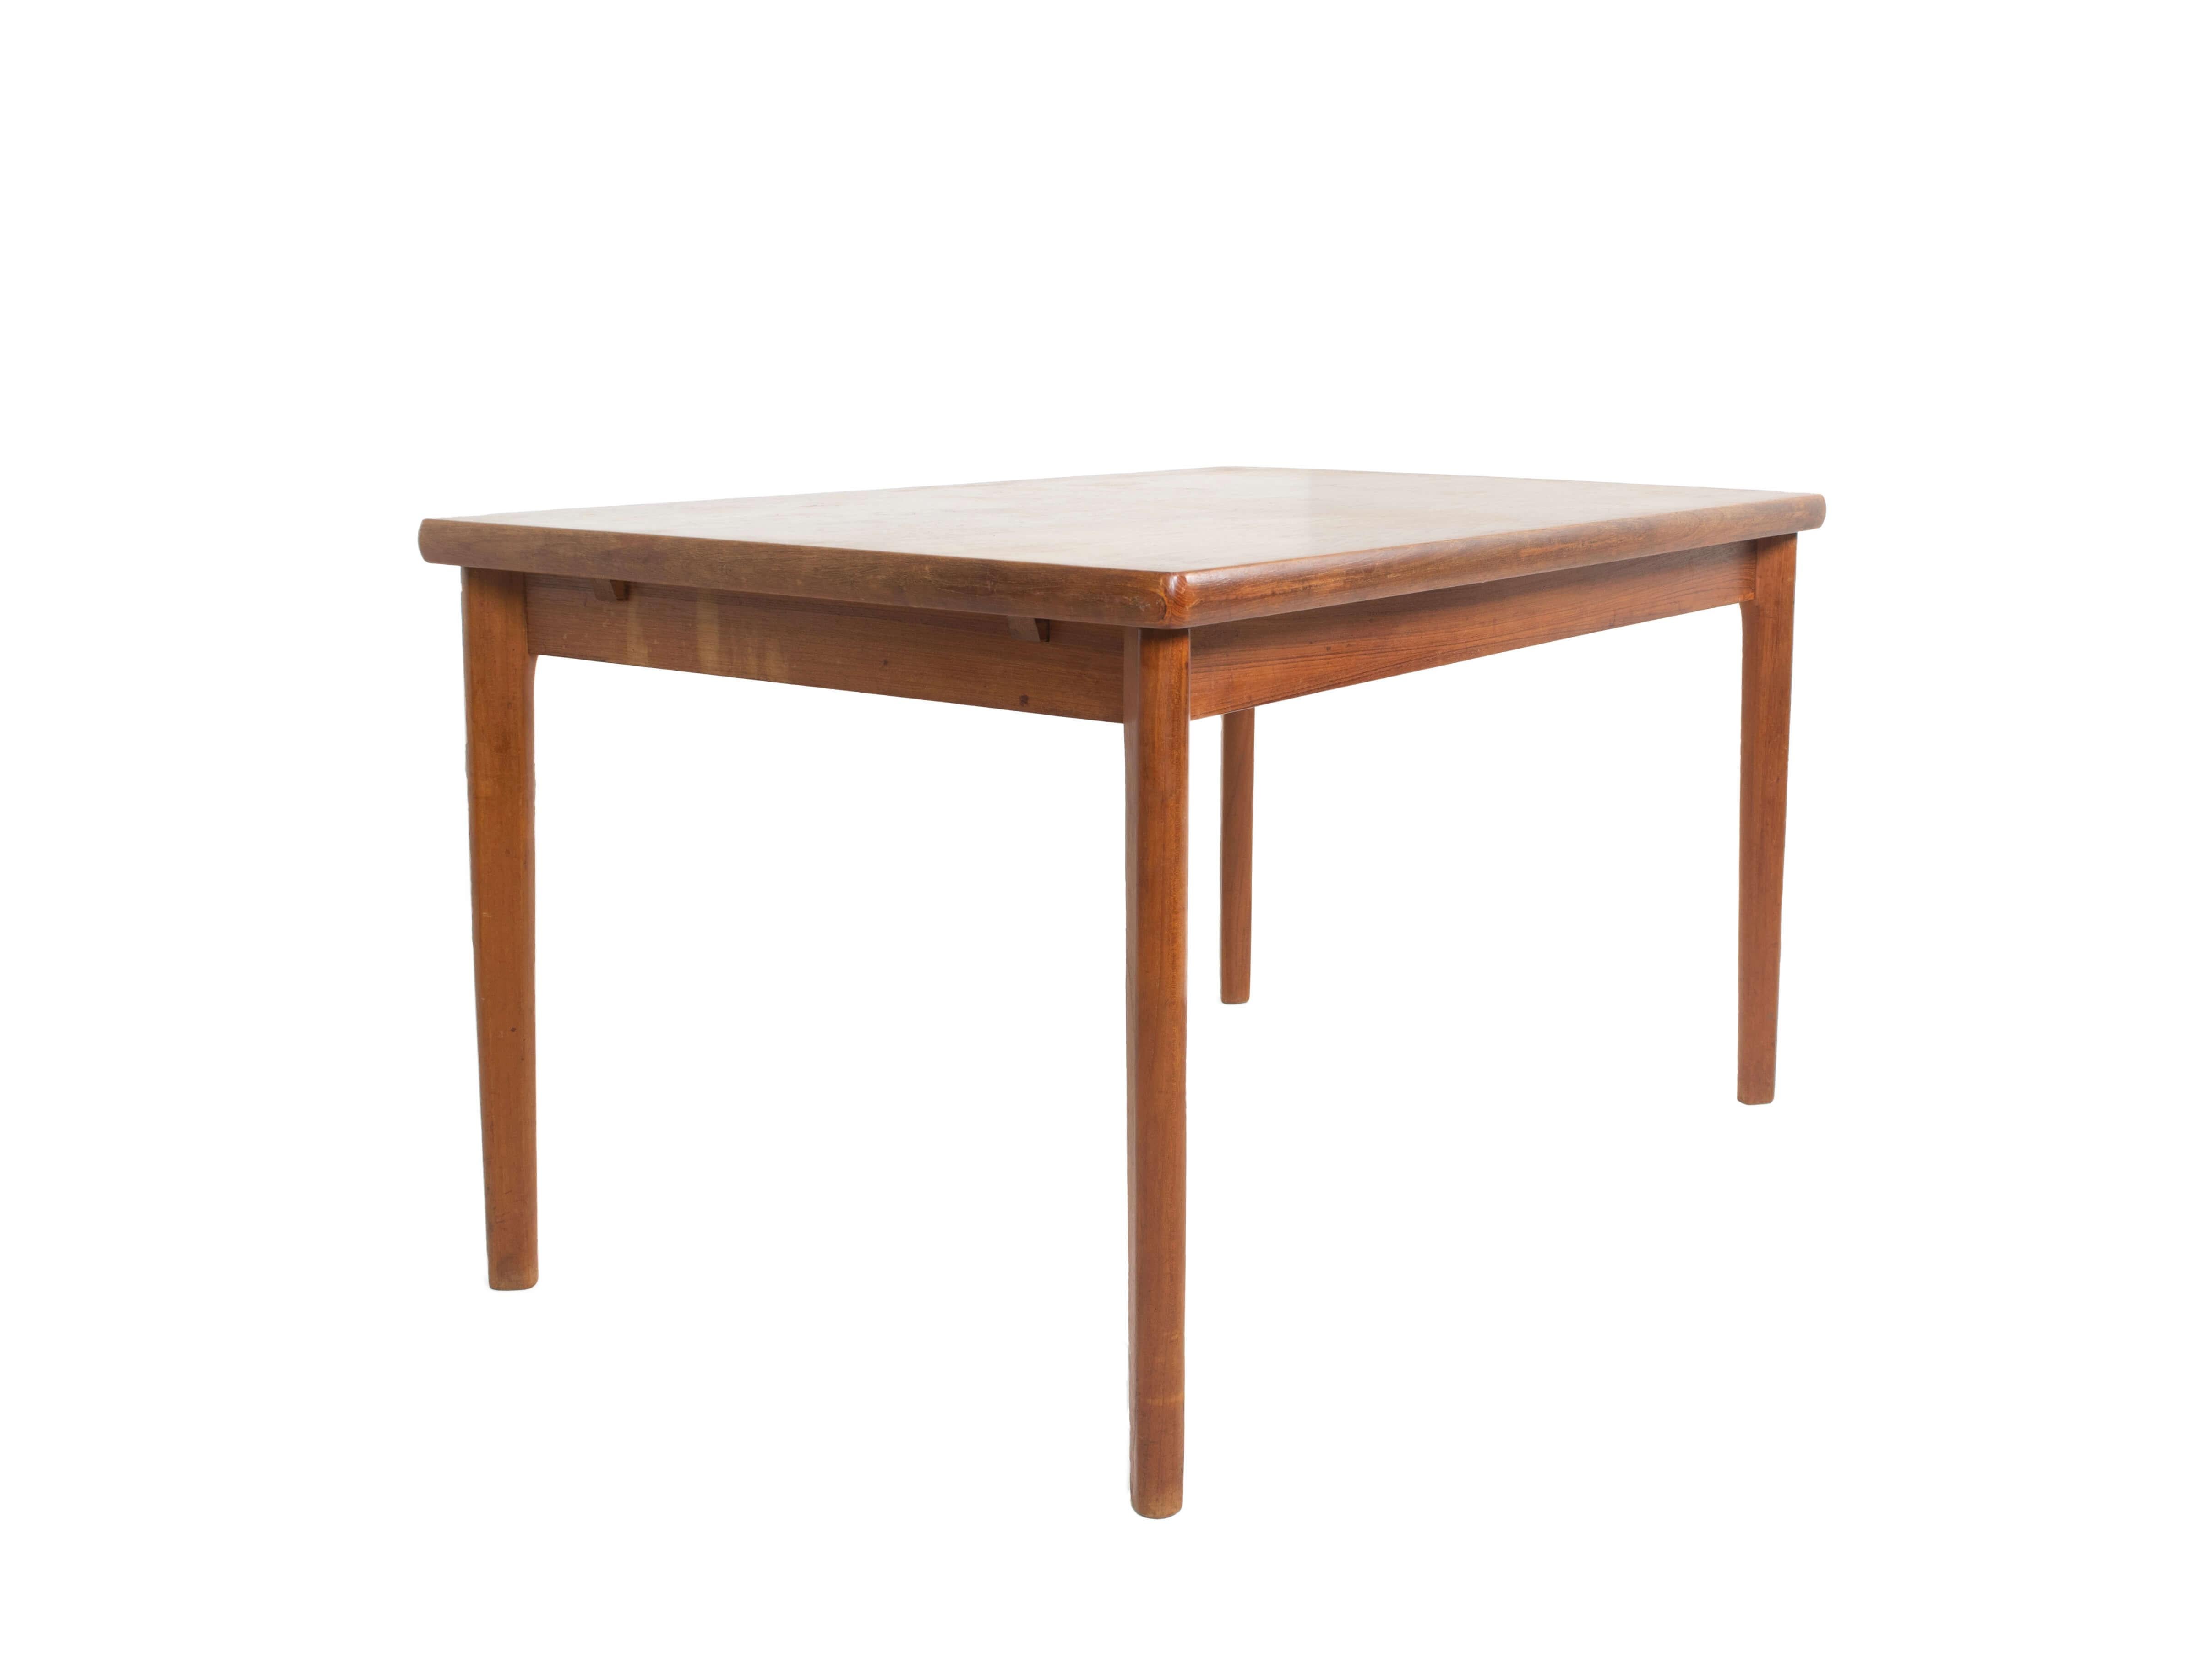 Nice extendable teak dining table by Henning Kjaernulr for Vejle Stole & Mobelfabrik, Denmark, 1960s. The table has a minimalistic design with easy and good functioning extension. The top can be removed where the two extensions are hidden and can